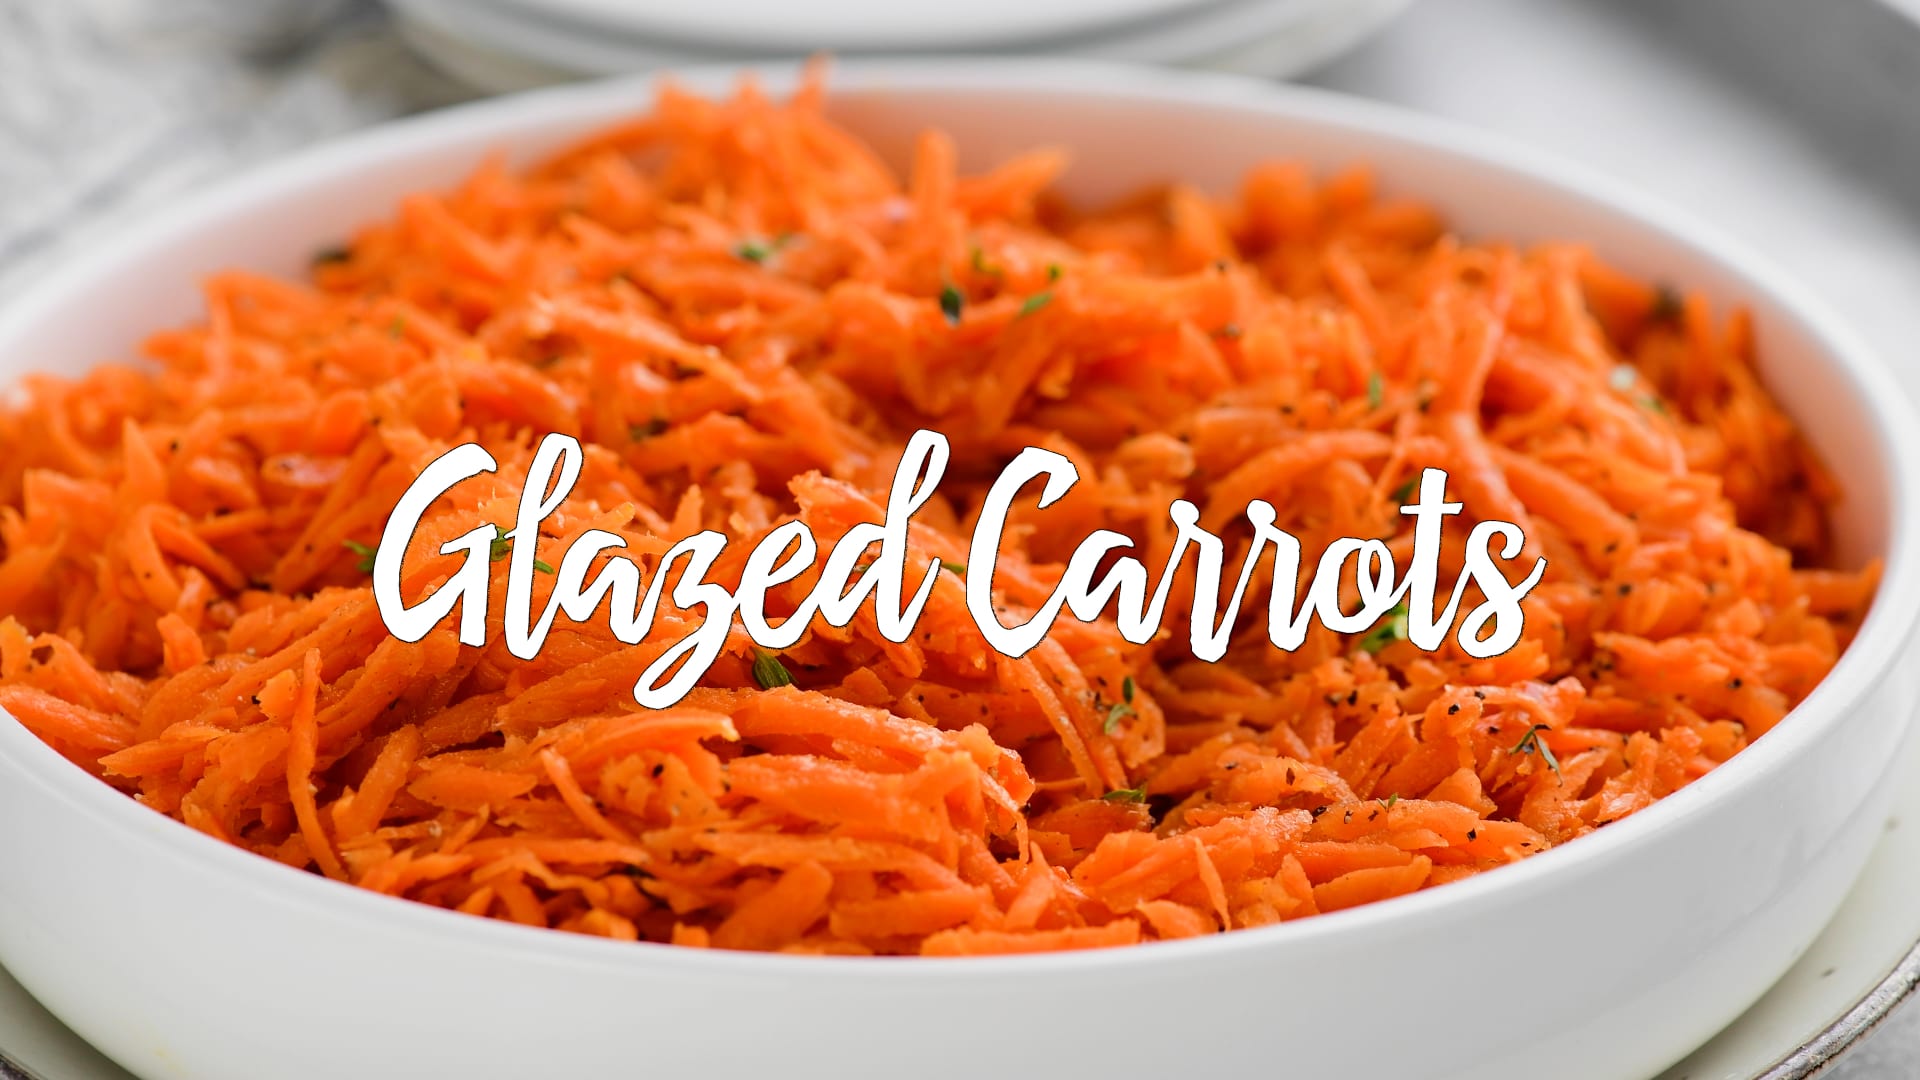 How to Shred Carrots - Cook Like Czechs